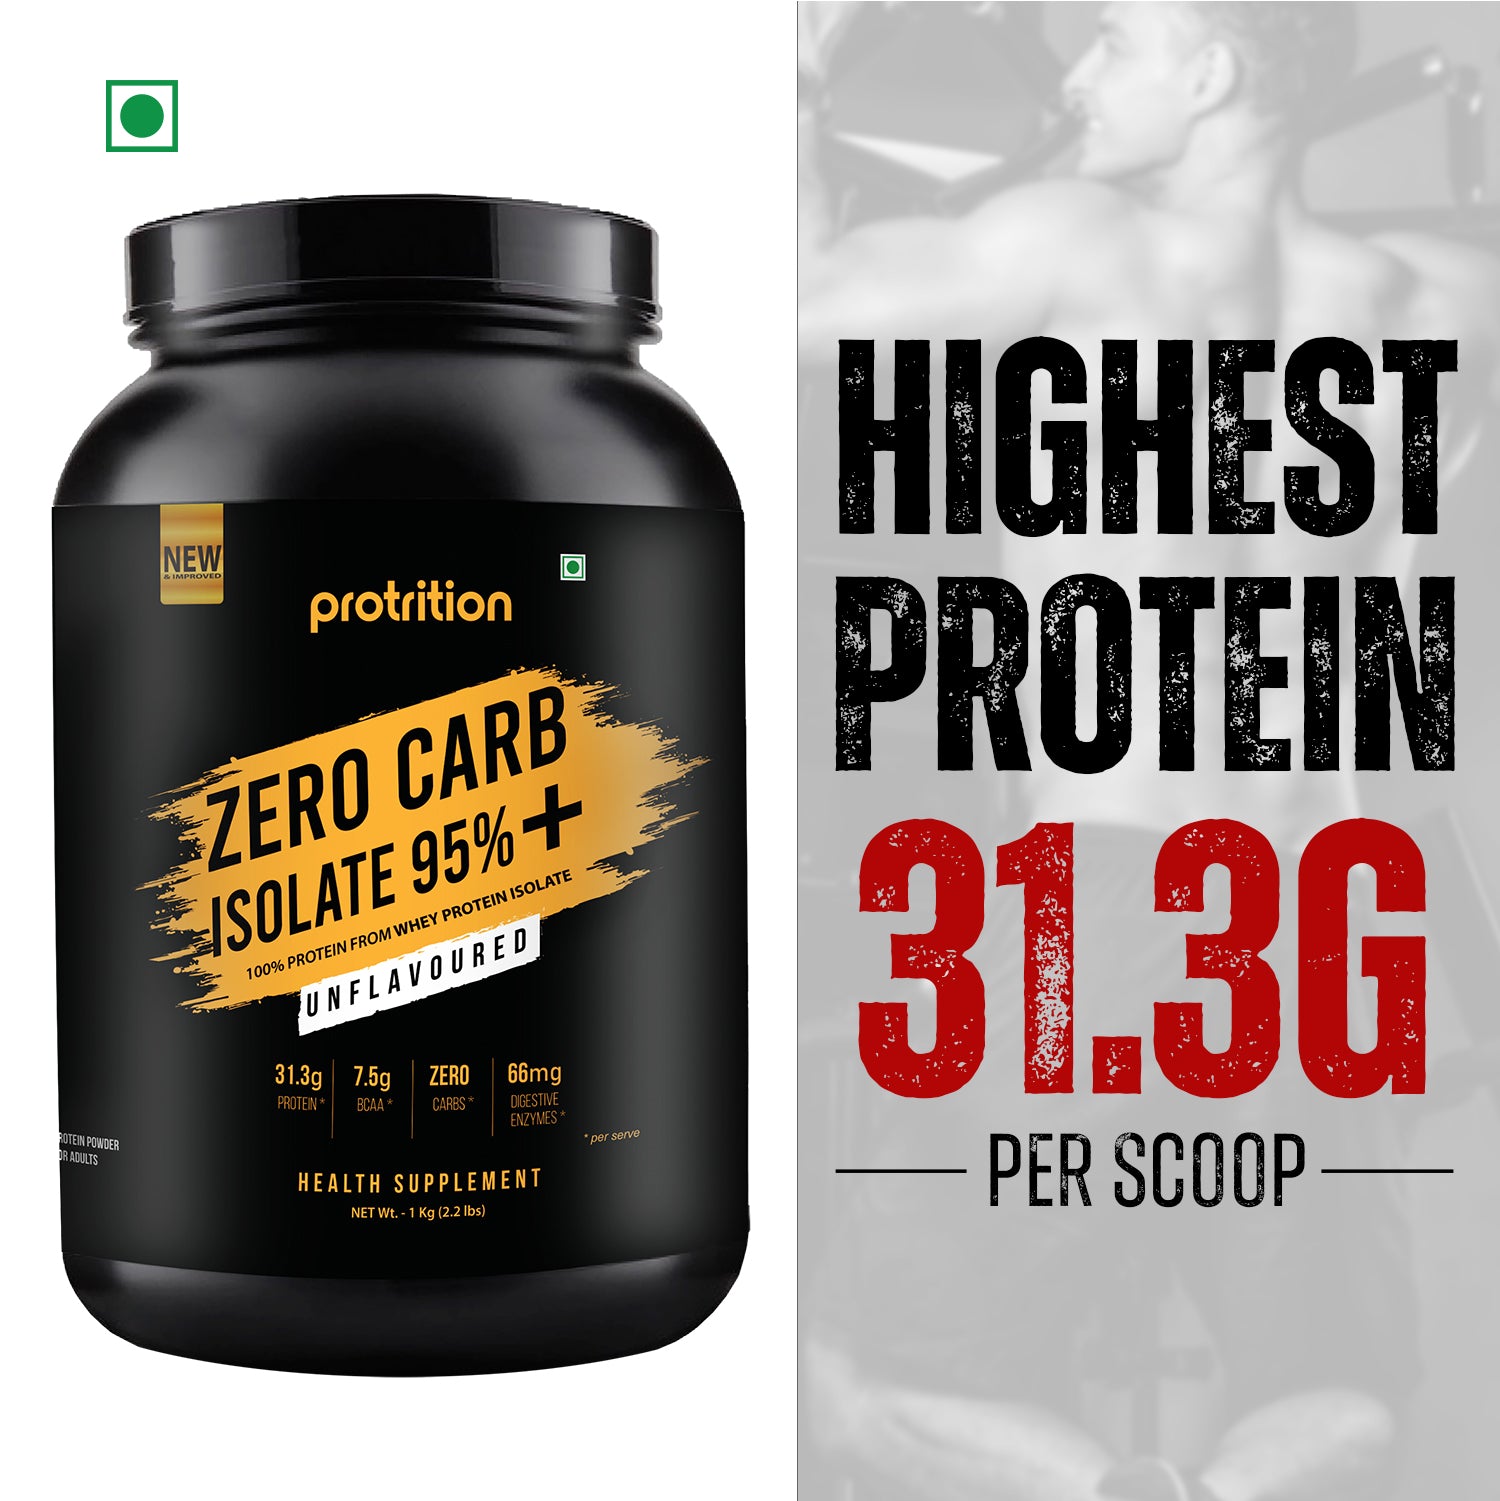 Protrition Zero Carb Isolate 95%, 1Kg, Unflavoured